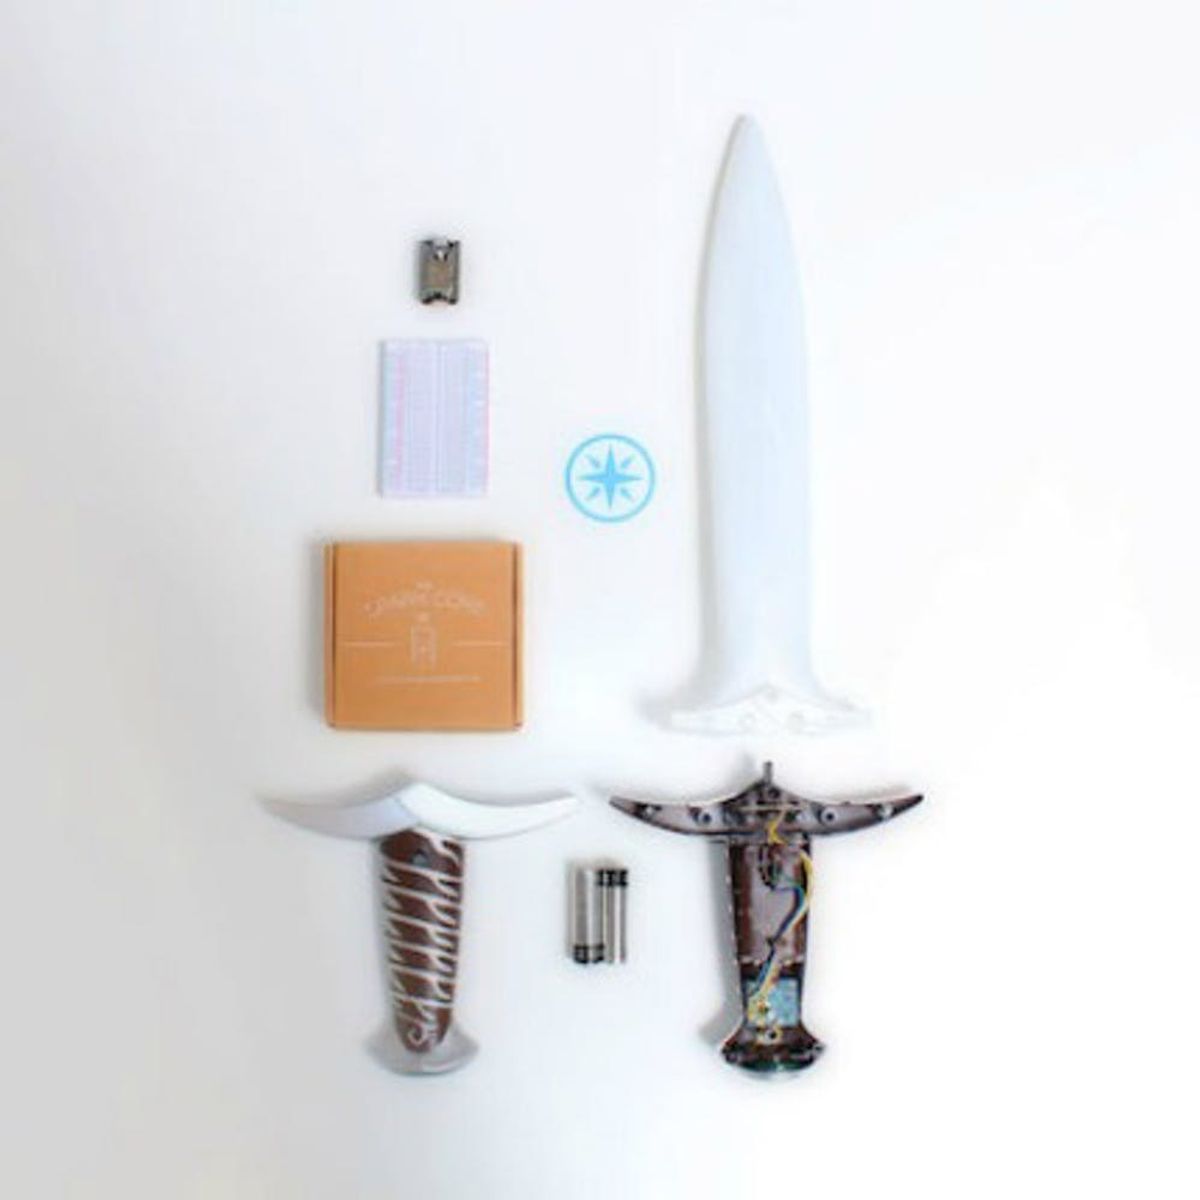 WTF?! This Hobbit Sword Glows When It Detects Unsafe WiFi